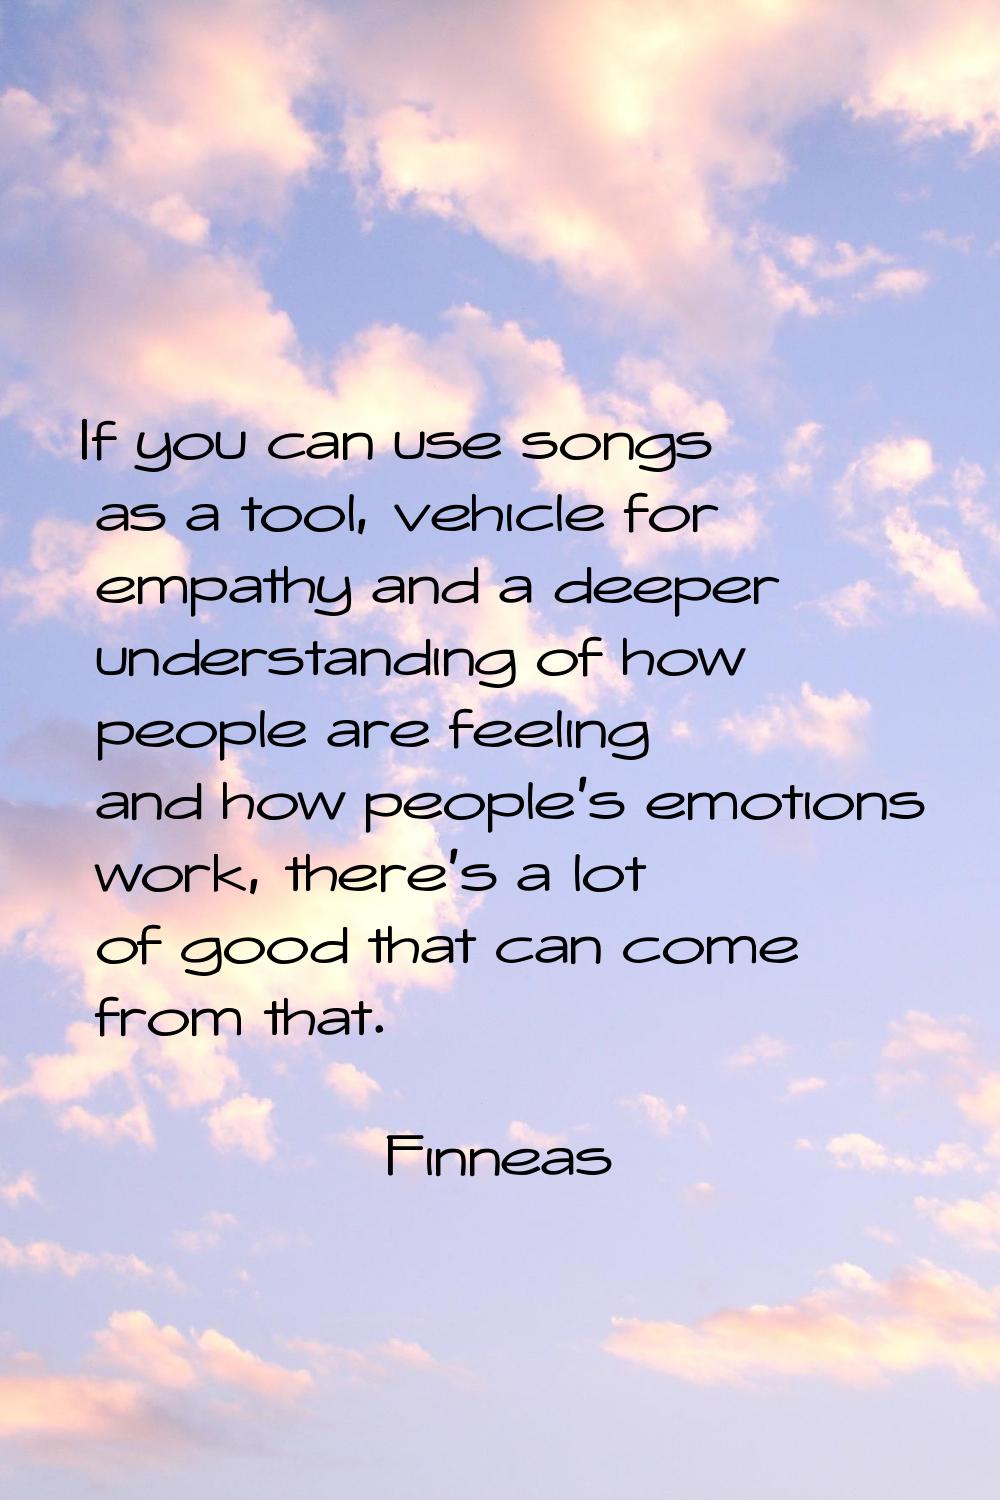 If you can use songs as a tool, vehicle for empathy and a deeper understanding of how people are fe